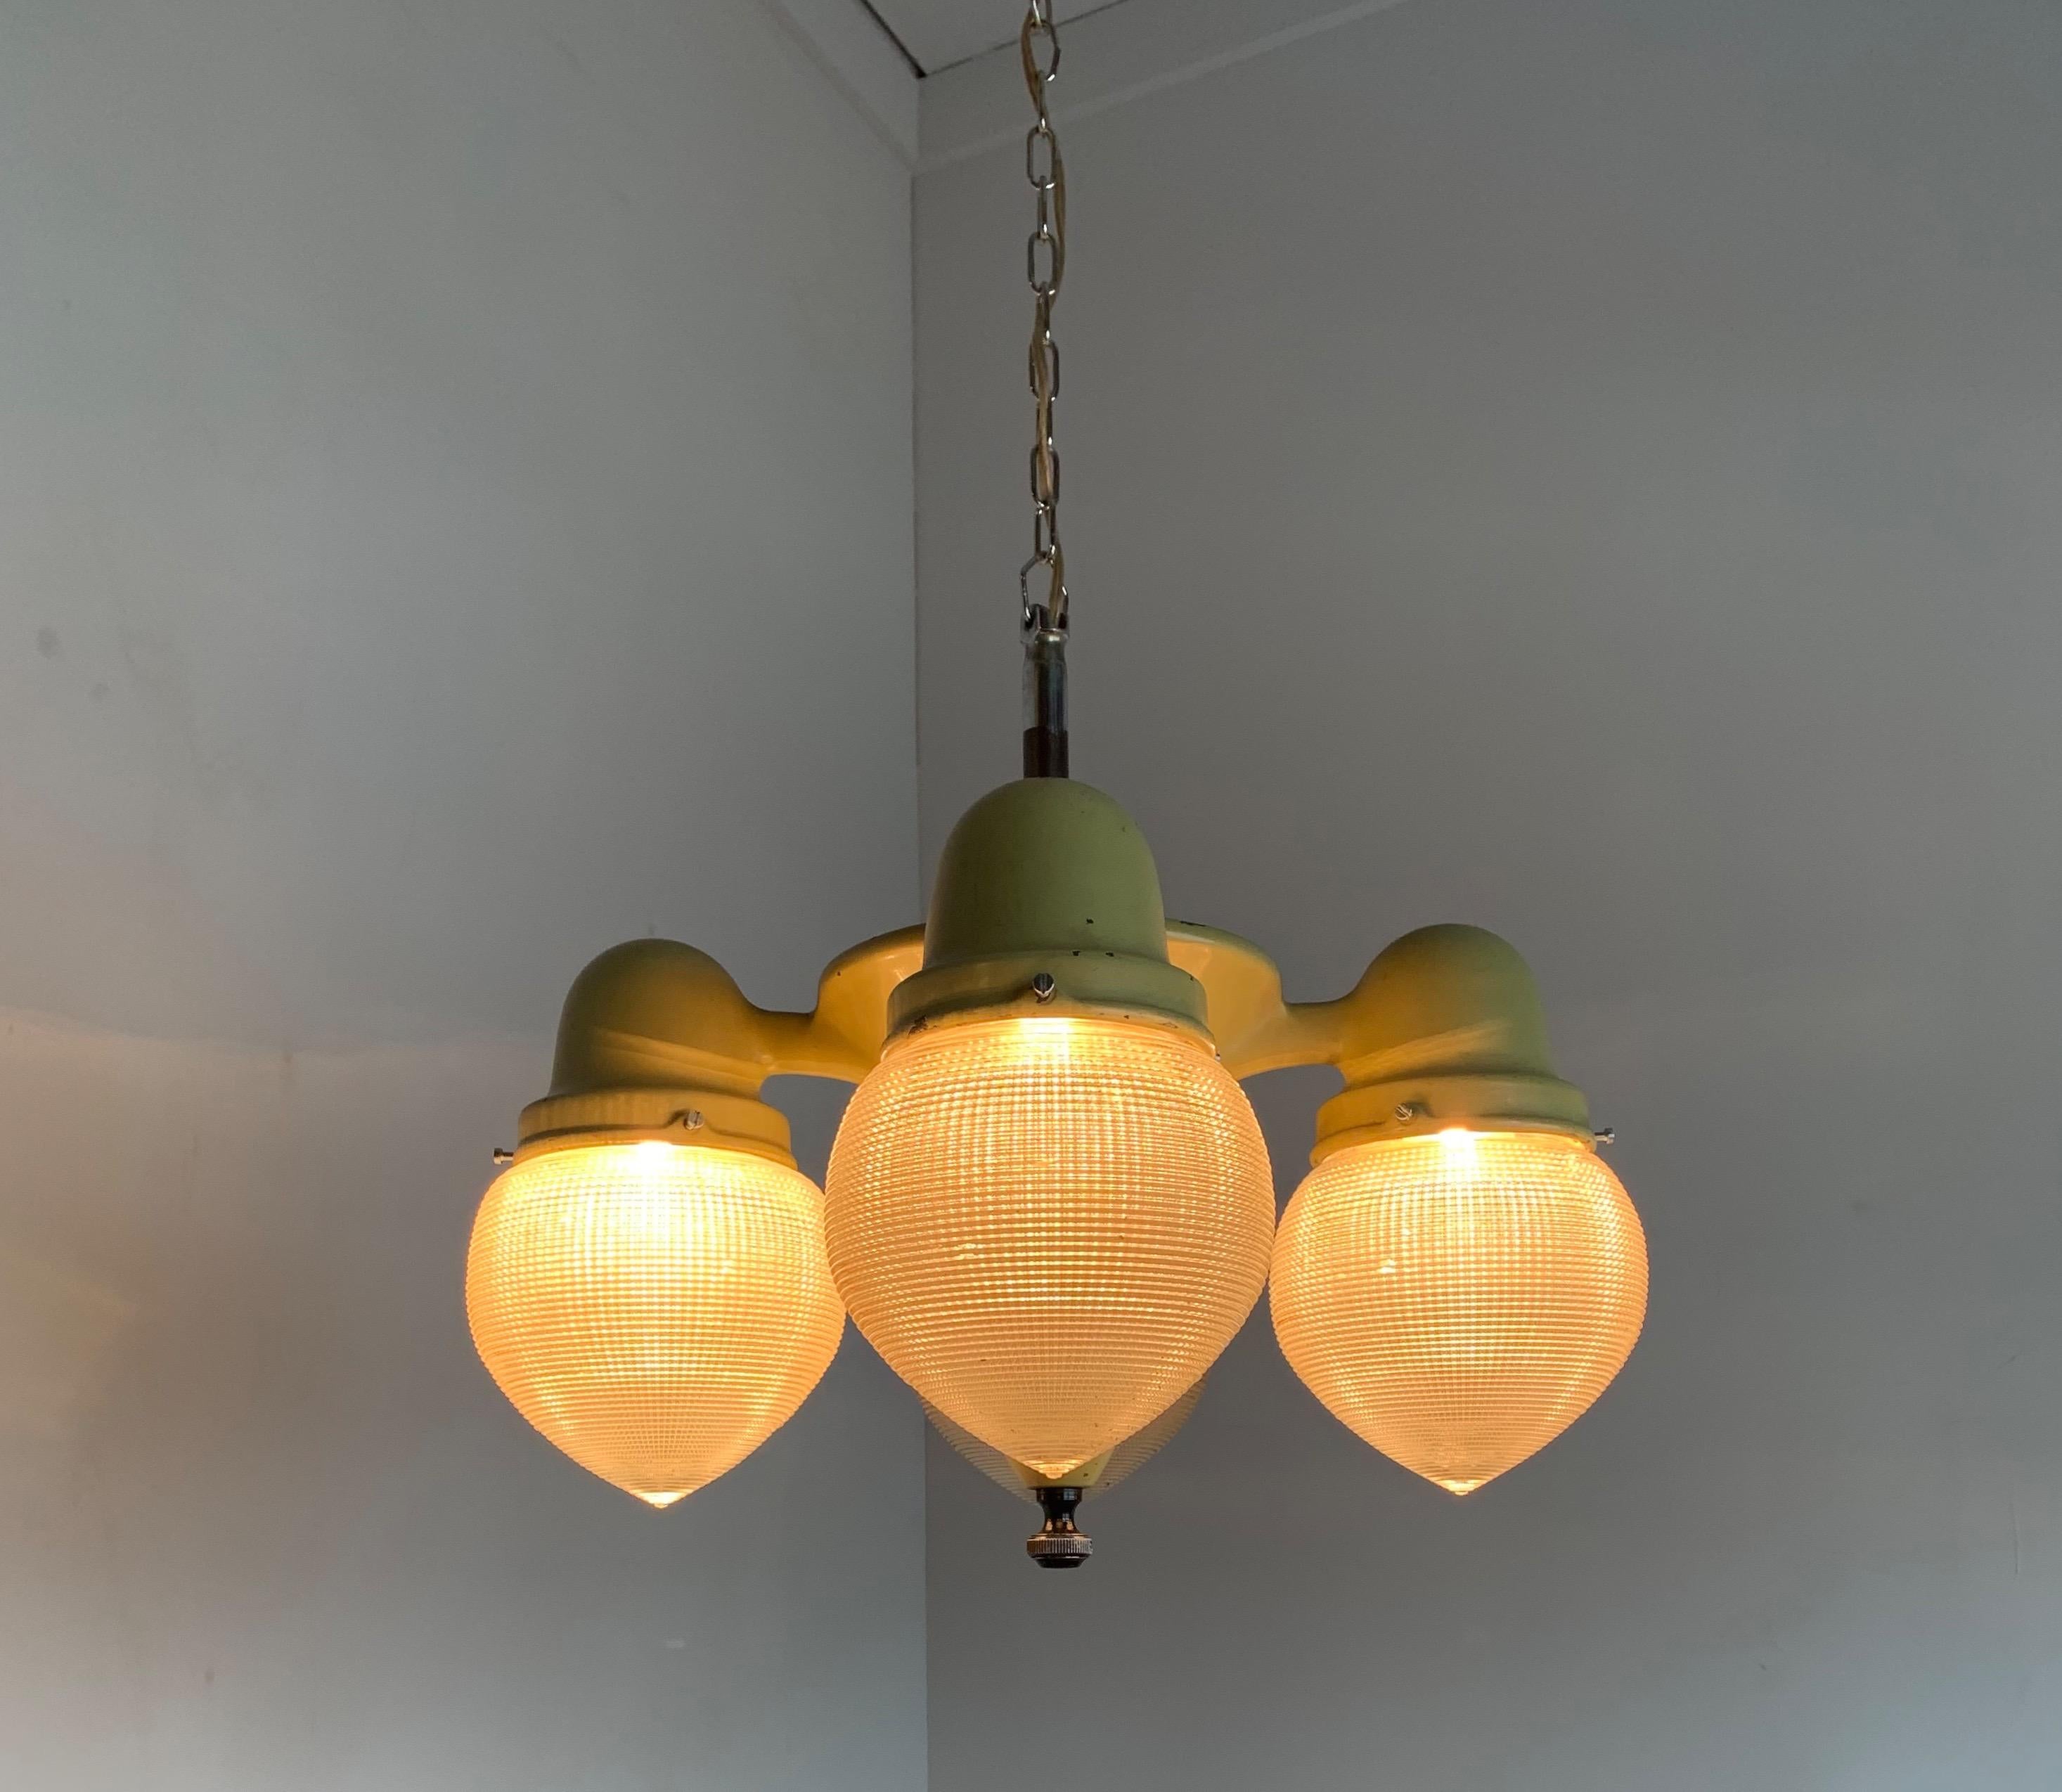 European Rare and Cool Midcentury Industrial Pendant Light with Prismatic Glass Shades